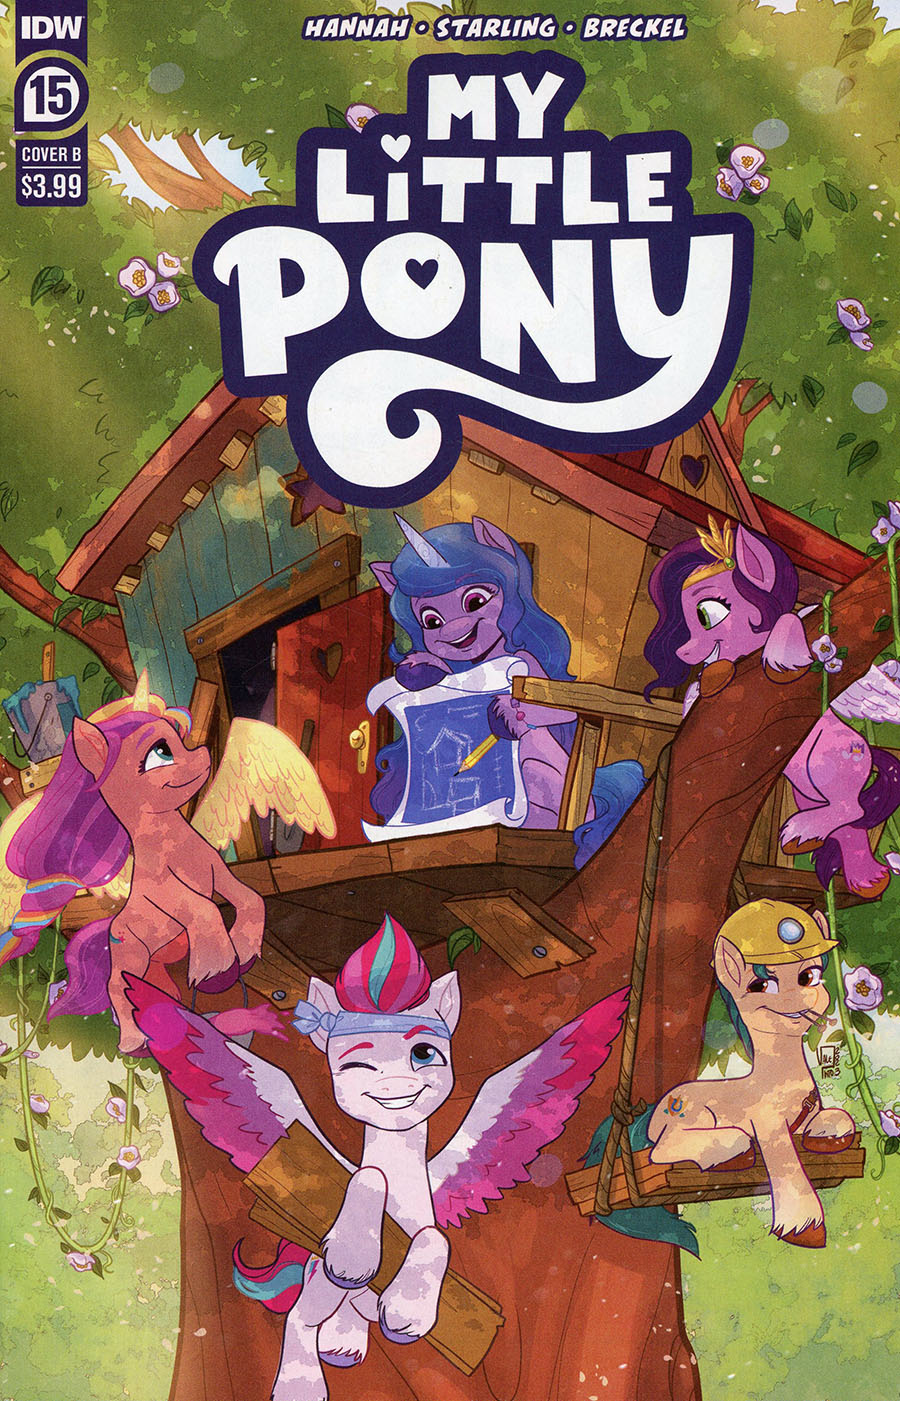 My Little Pony #15 Cover B Variant Valentina Pinto Cover